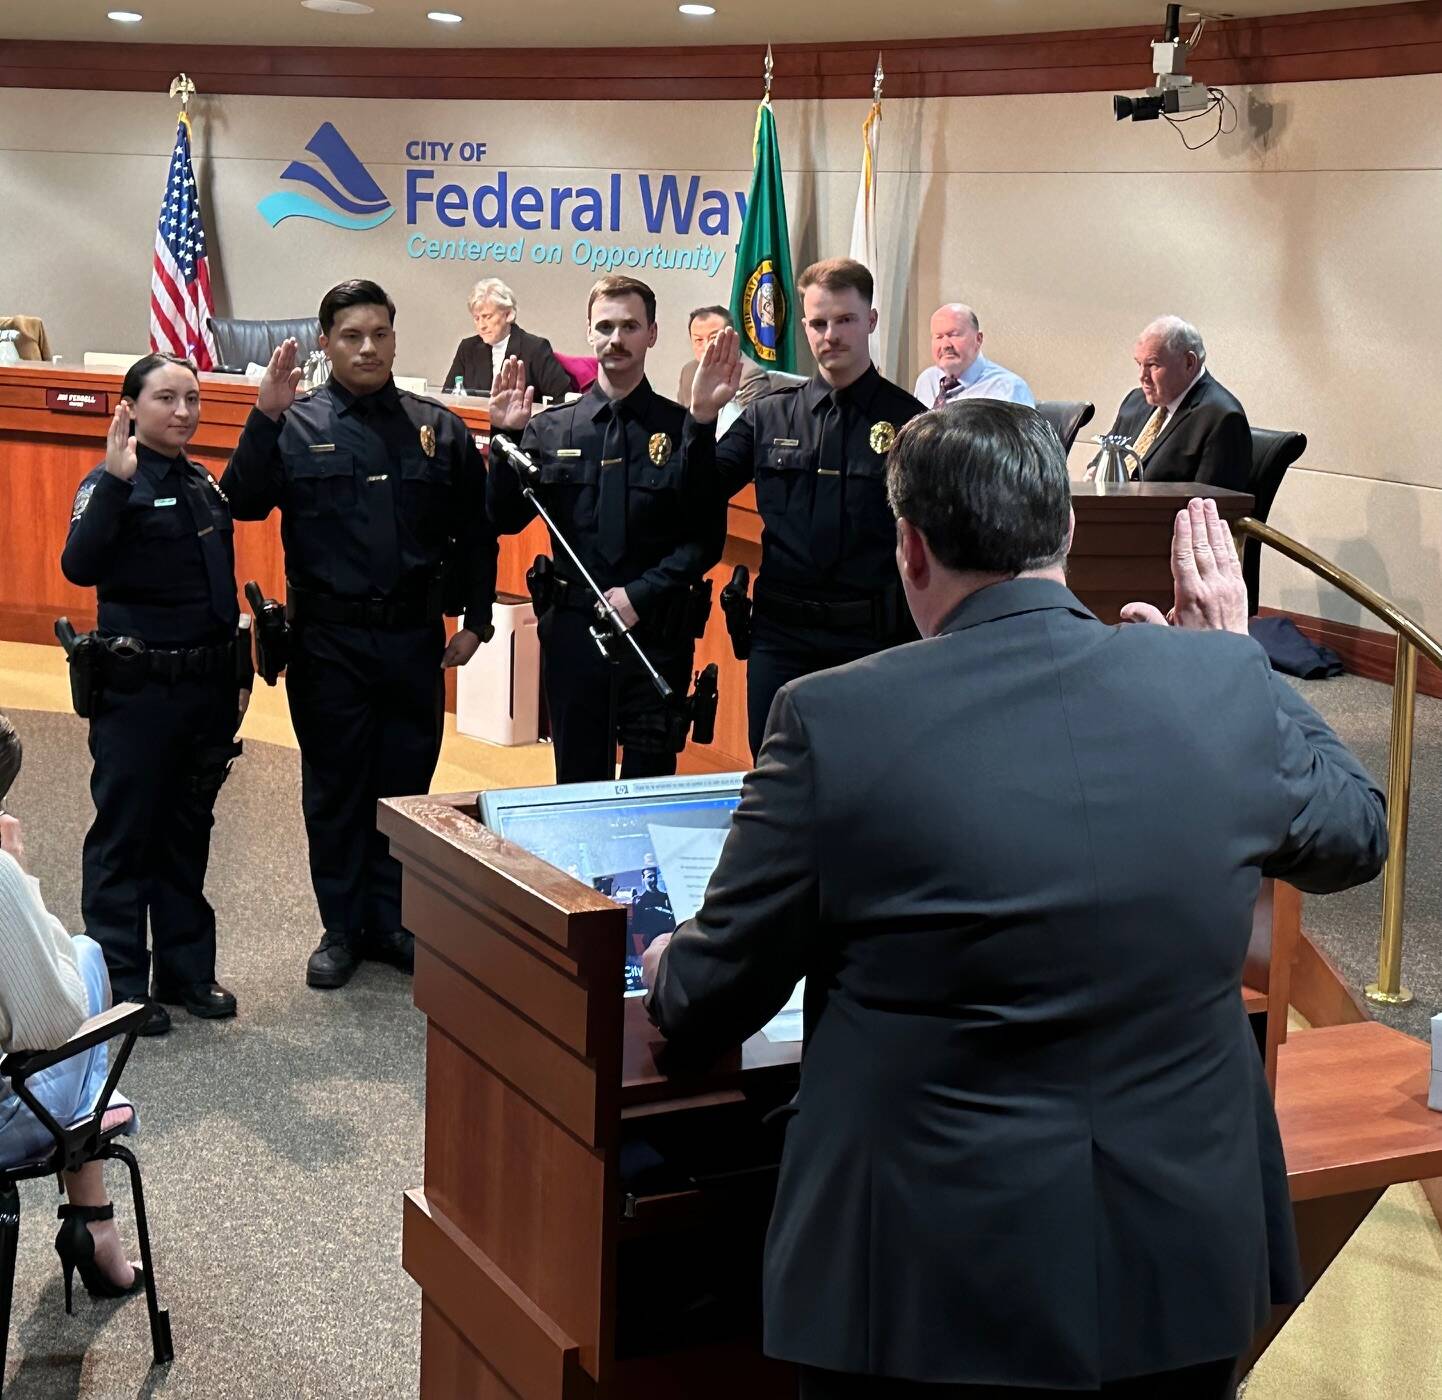 Photo by David Solano / City of Federal Way
New officers were sworn in by Mayor Ferrell.